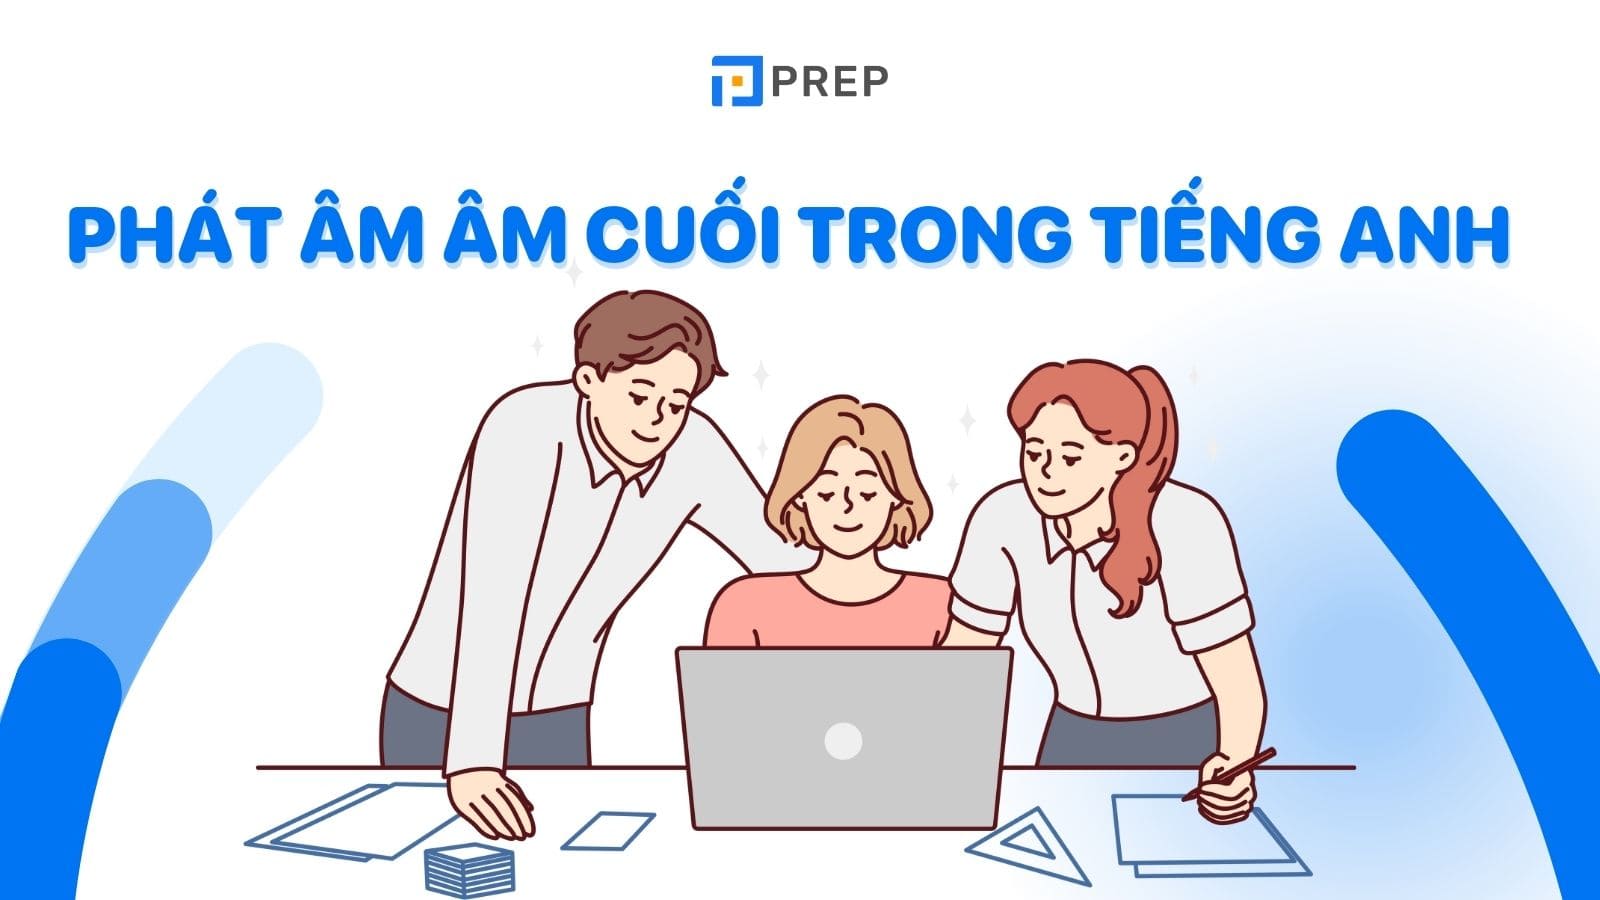 phat-am-am-cuoi-trong-tieng-anh.jpg